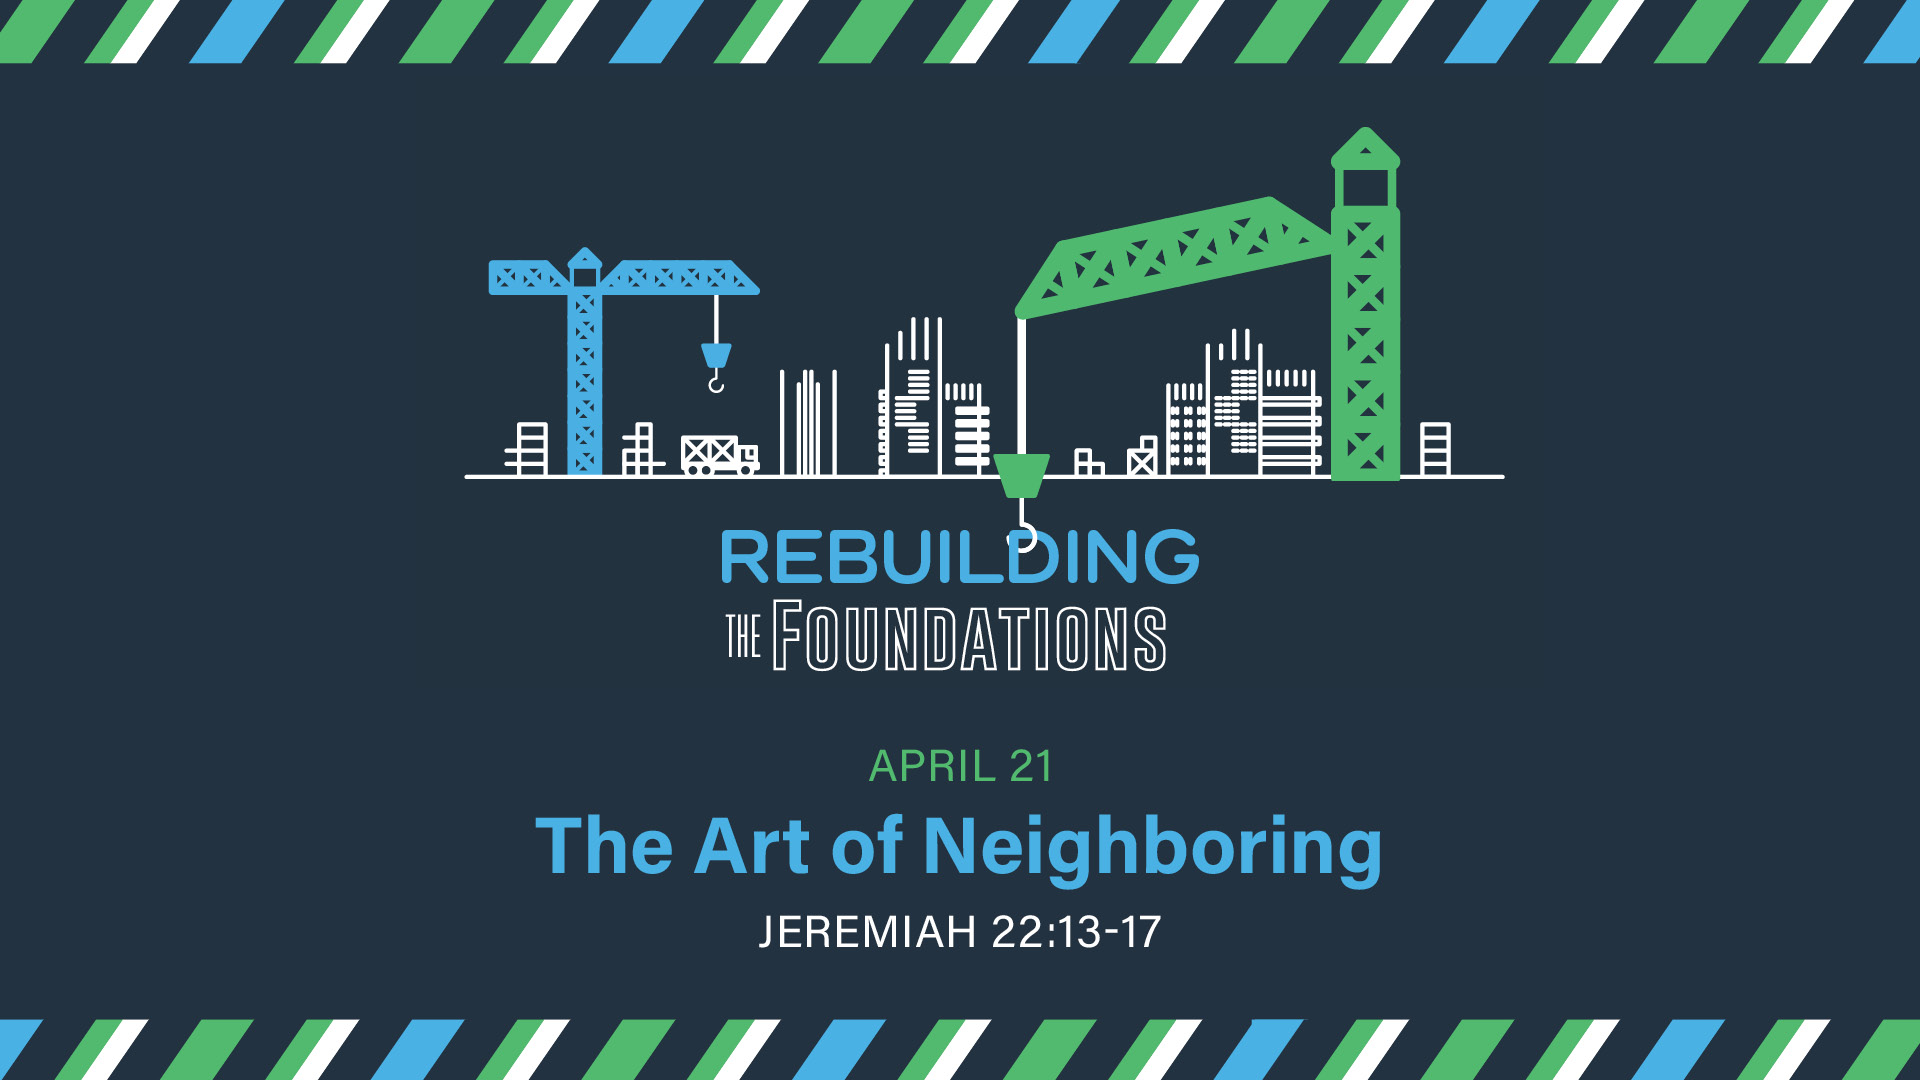 Rebuilding the Foundations: The Art of Neighboring